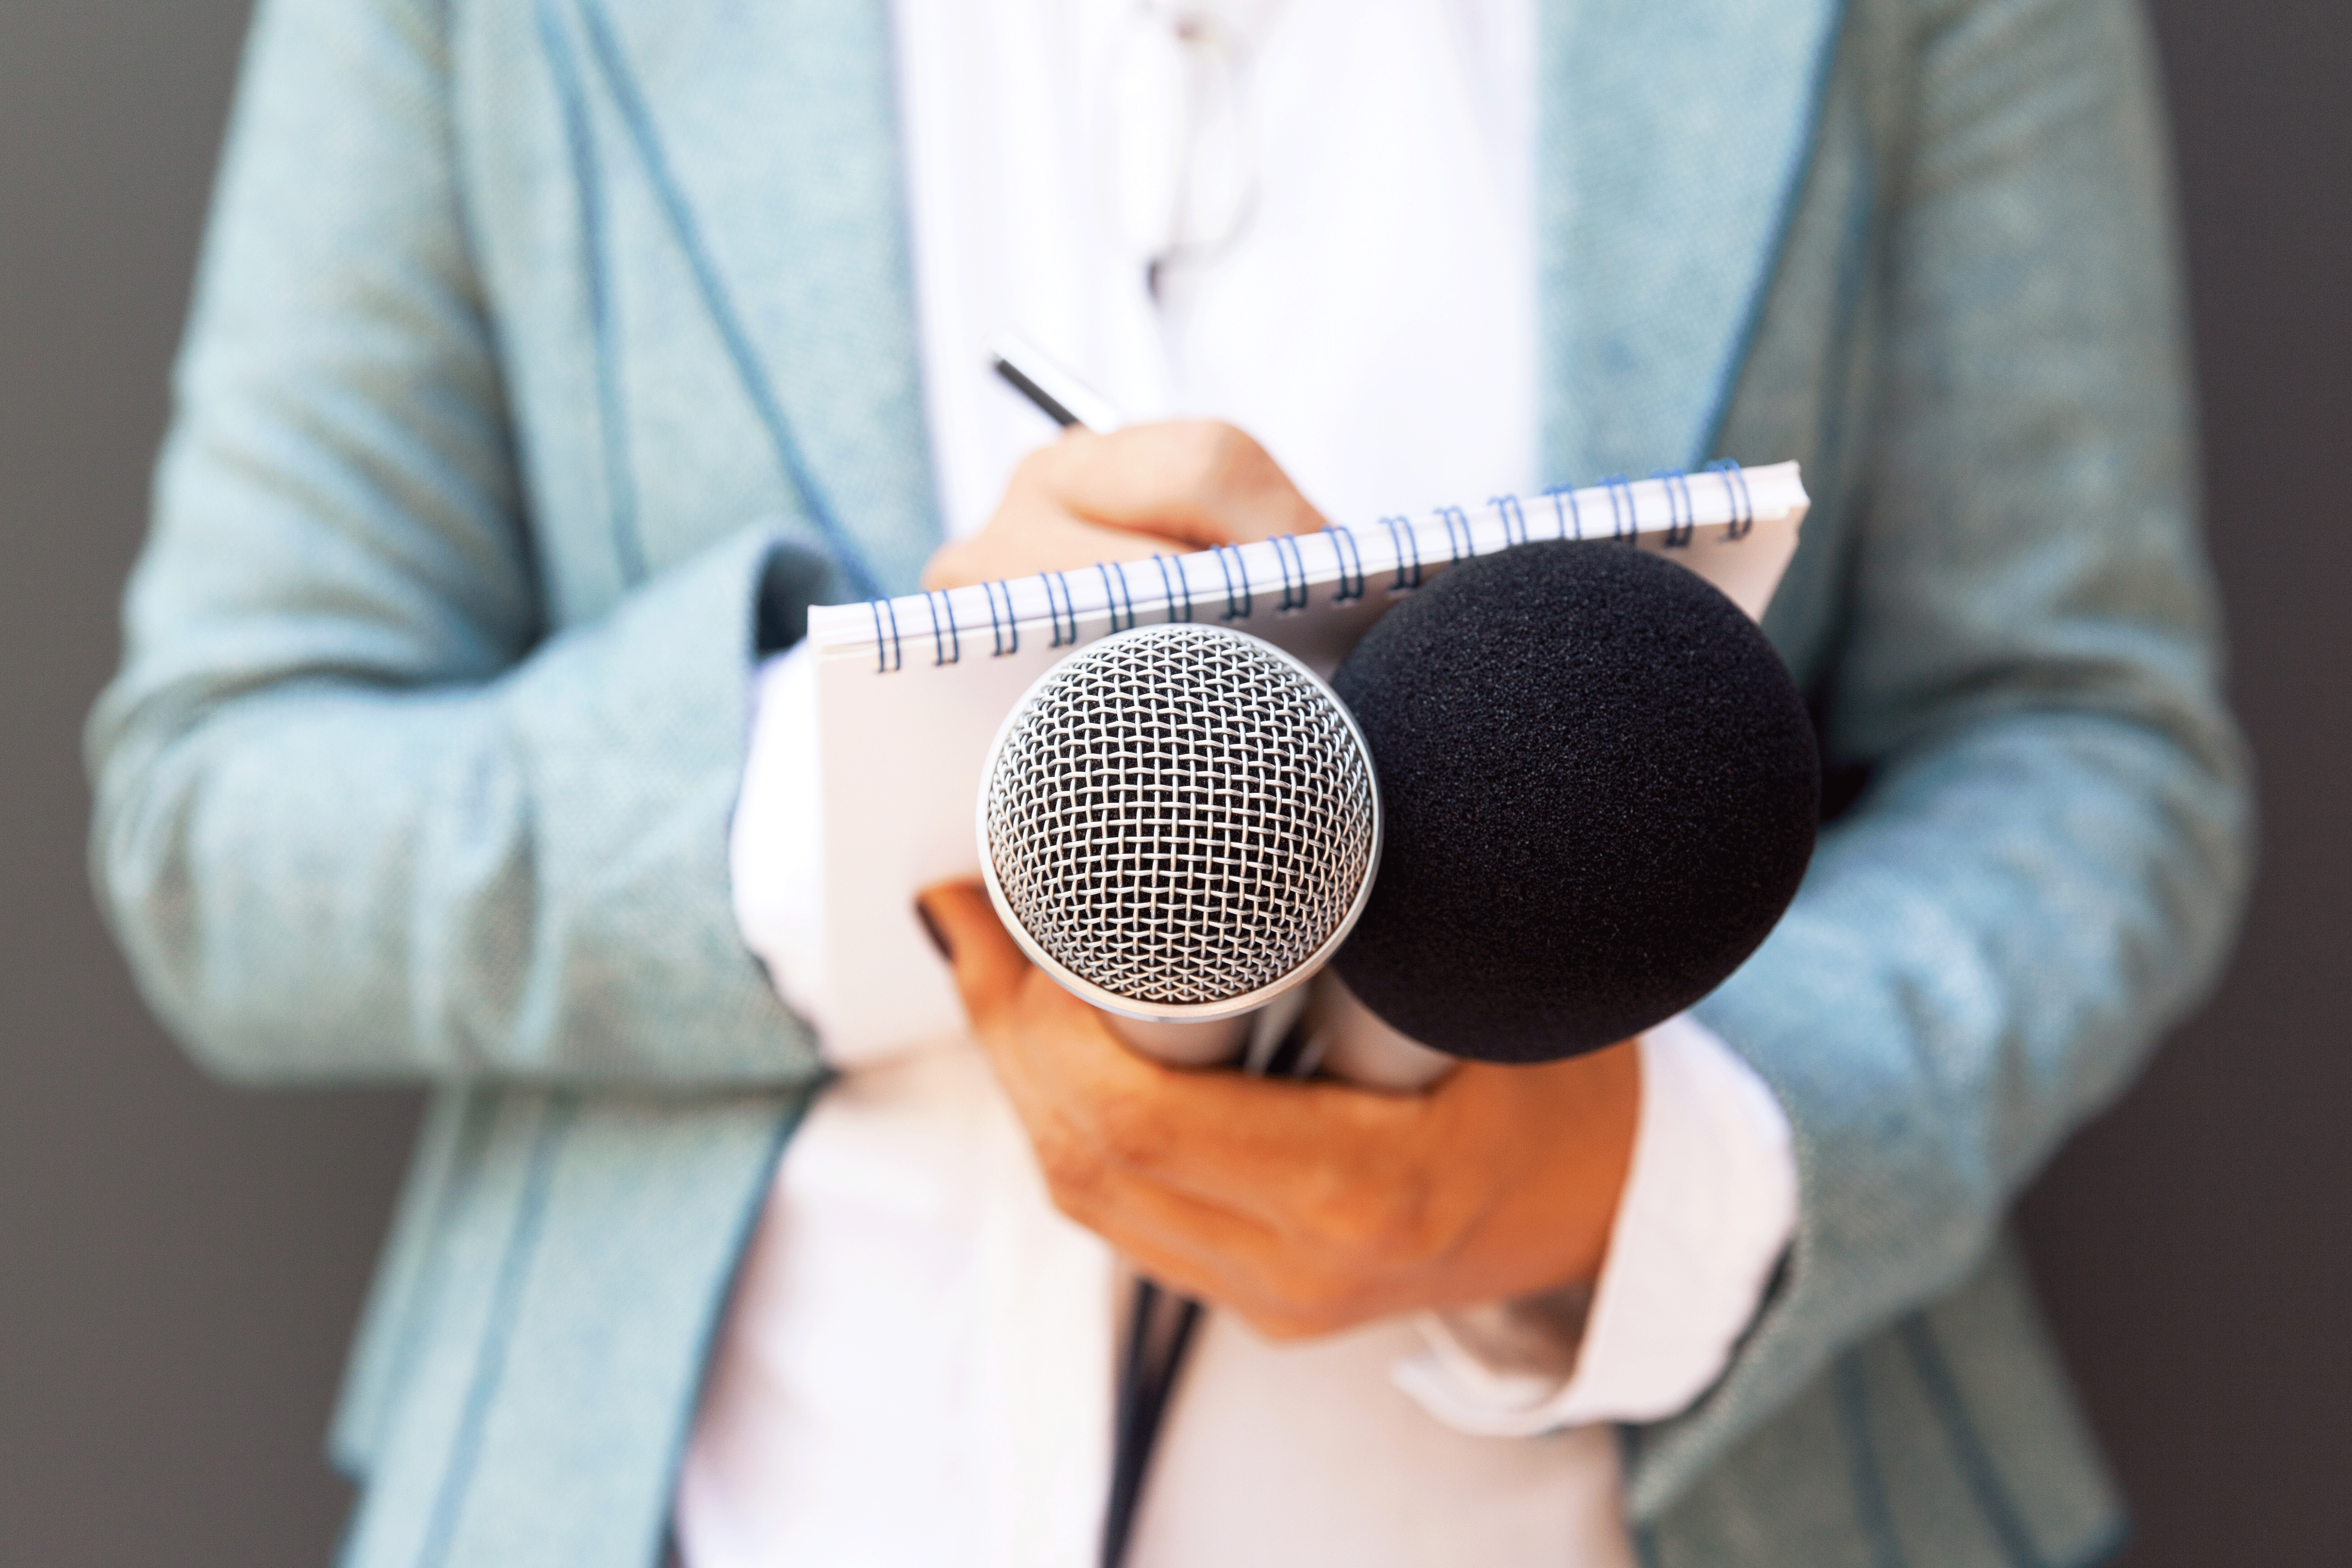 A person holds a microphone and takes notes.